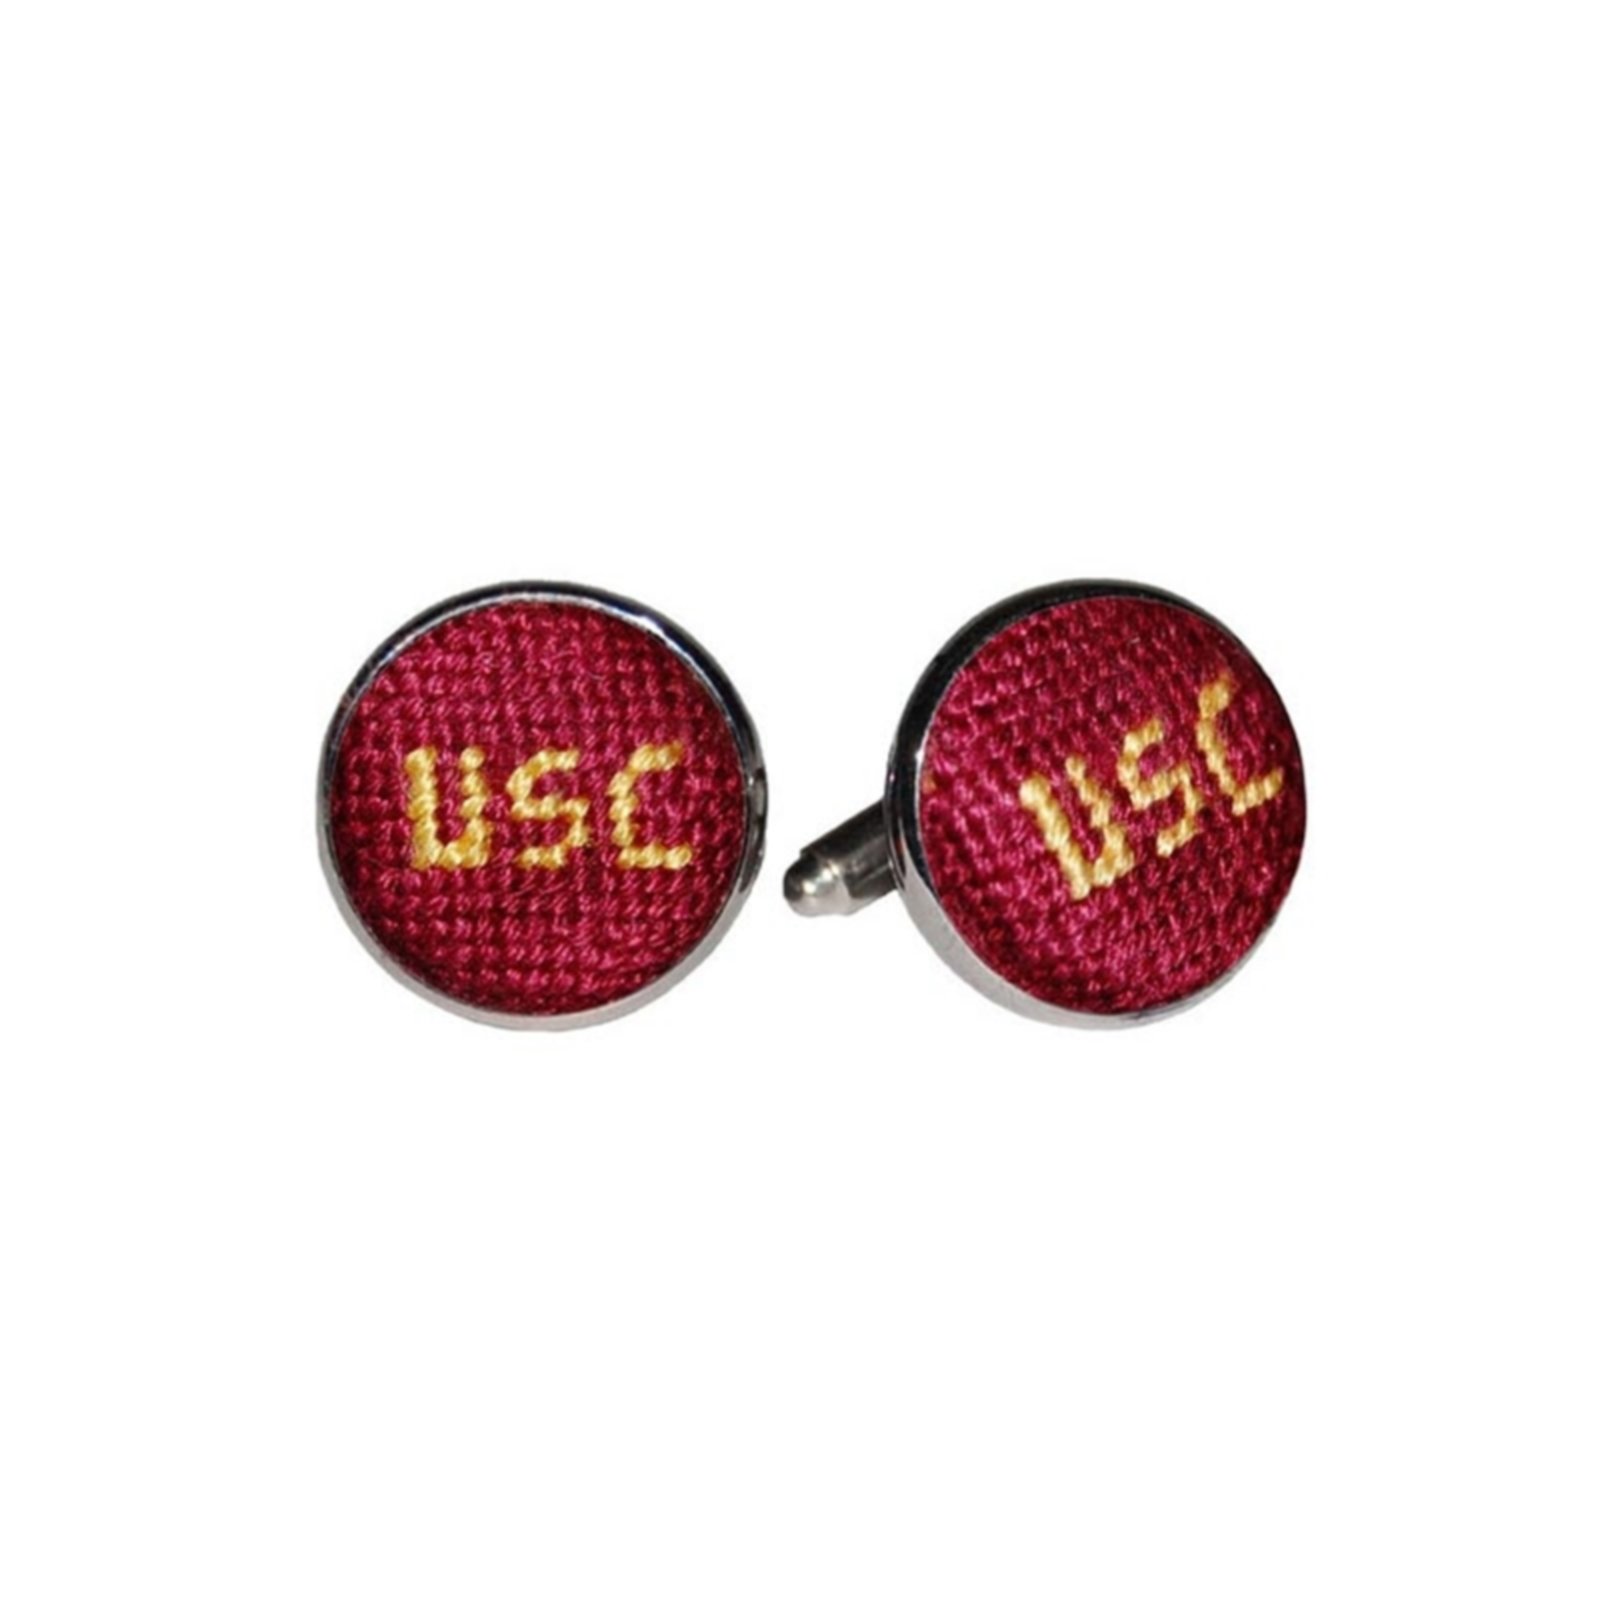 USC Block Mens Embroidered Cufflinks image01